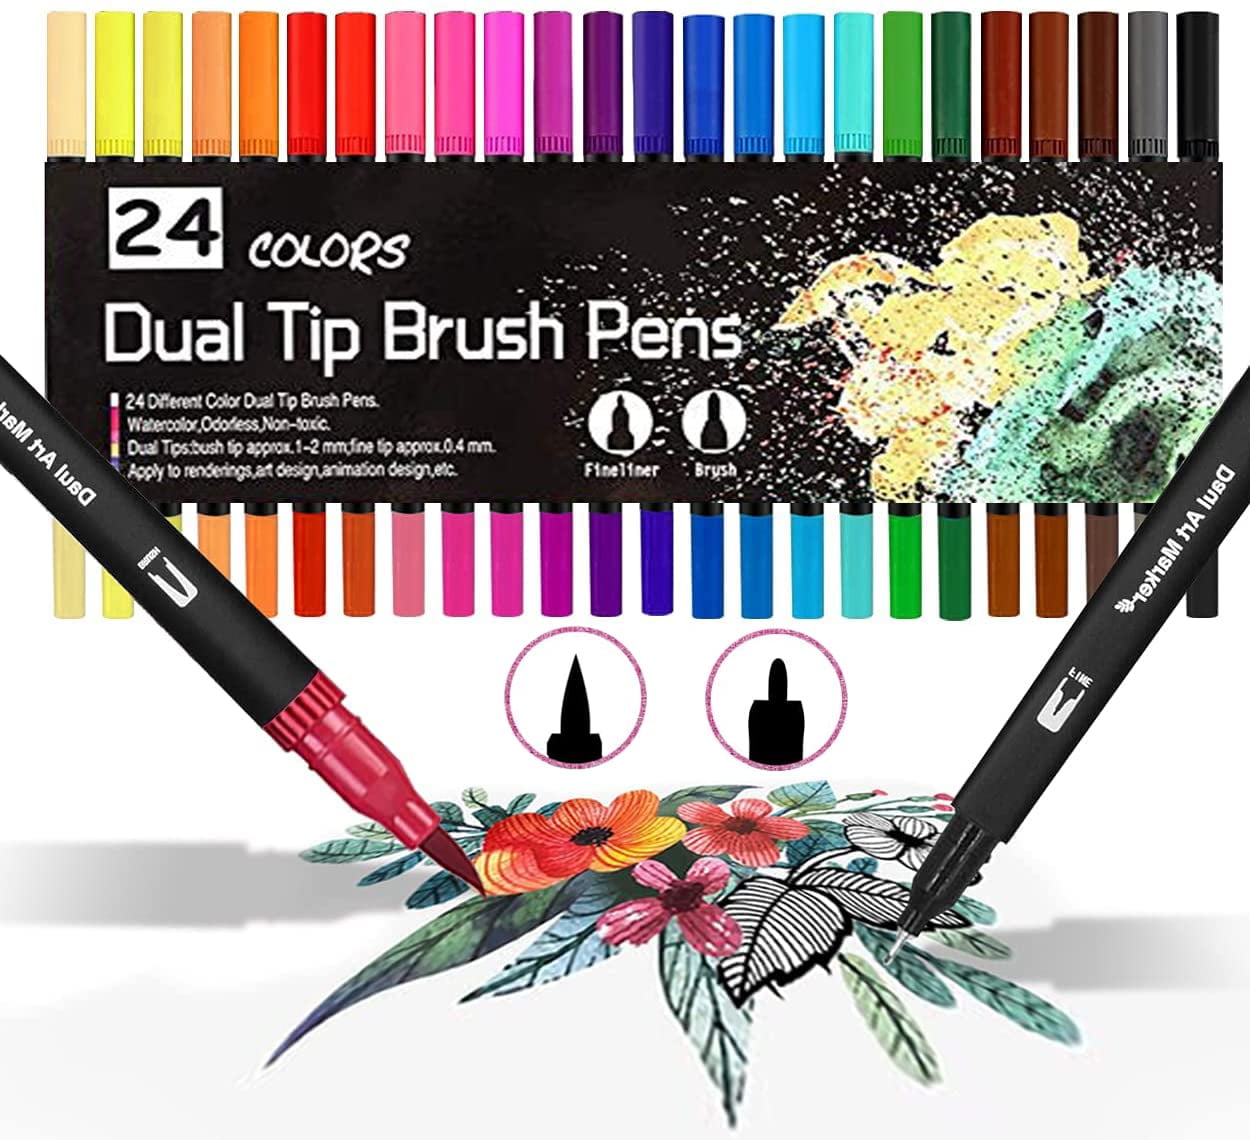 OBOSOE 48Colors Dual Tip Brush Pens, Brush Pens Markers Felt Tip Pens  Colouring Pens Brush Tip Art Markers for Adults Colouring , Sketching,  Painting